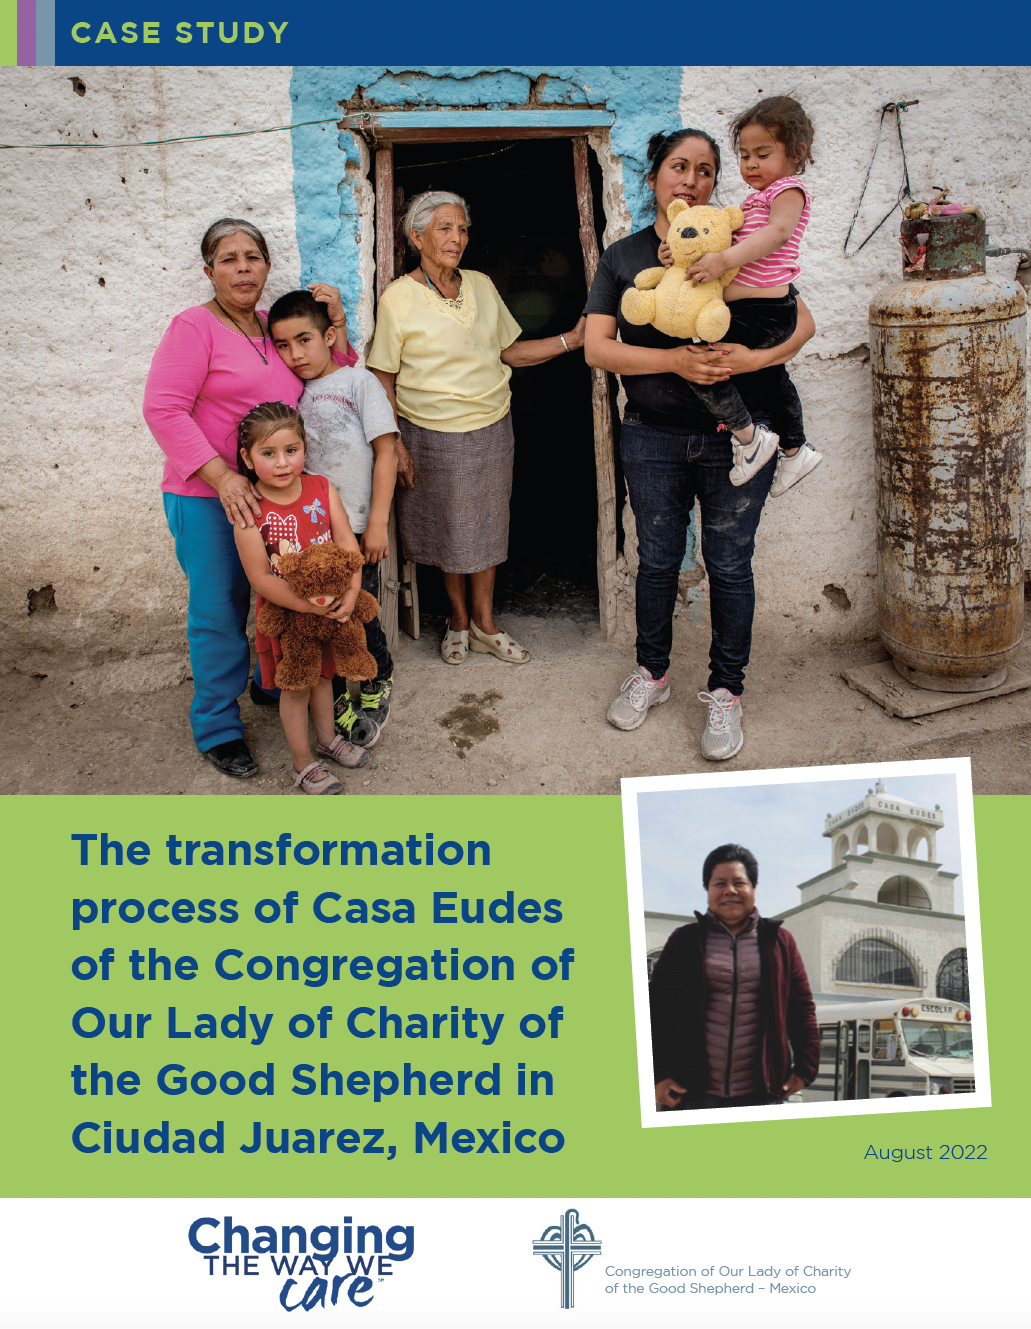 The Transformation Process of Casa Eudes of the Congregation of Our Lady of Charity of the Good Shepherd in Ciudad Juarez, Mexico